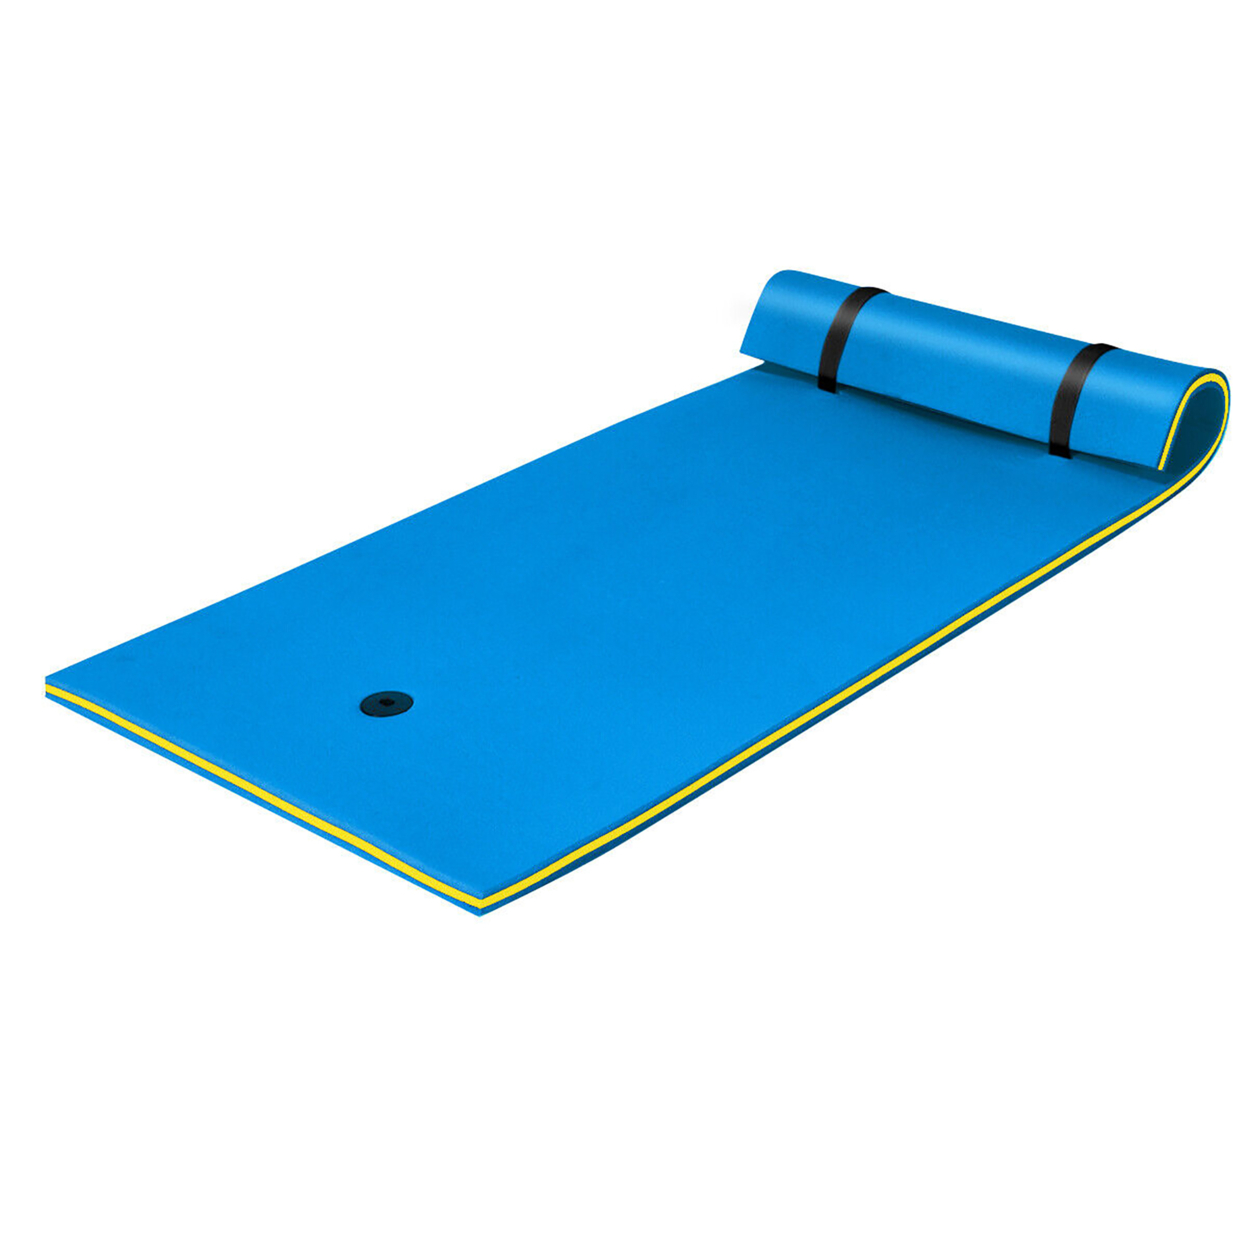 87'' X 36'' 3-layer Floating Pad Mat Water Sports Recreation Relaxing Blue